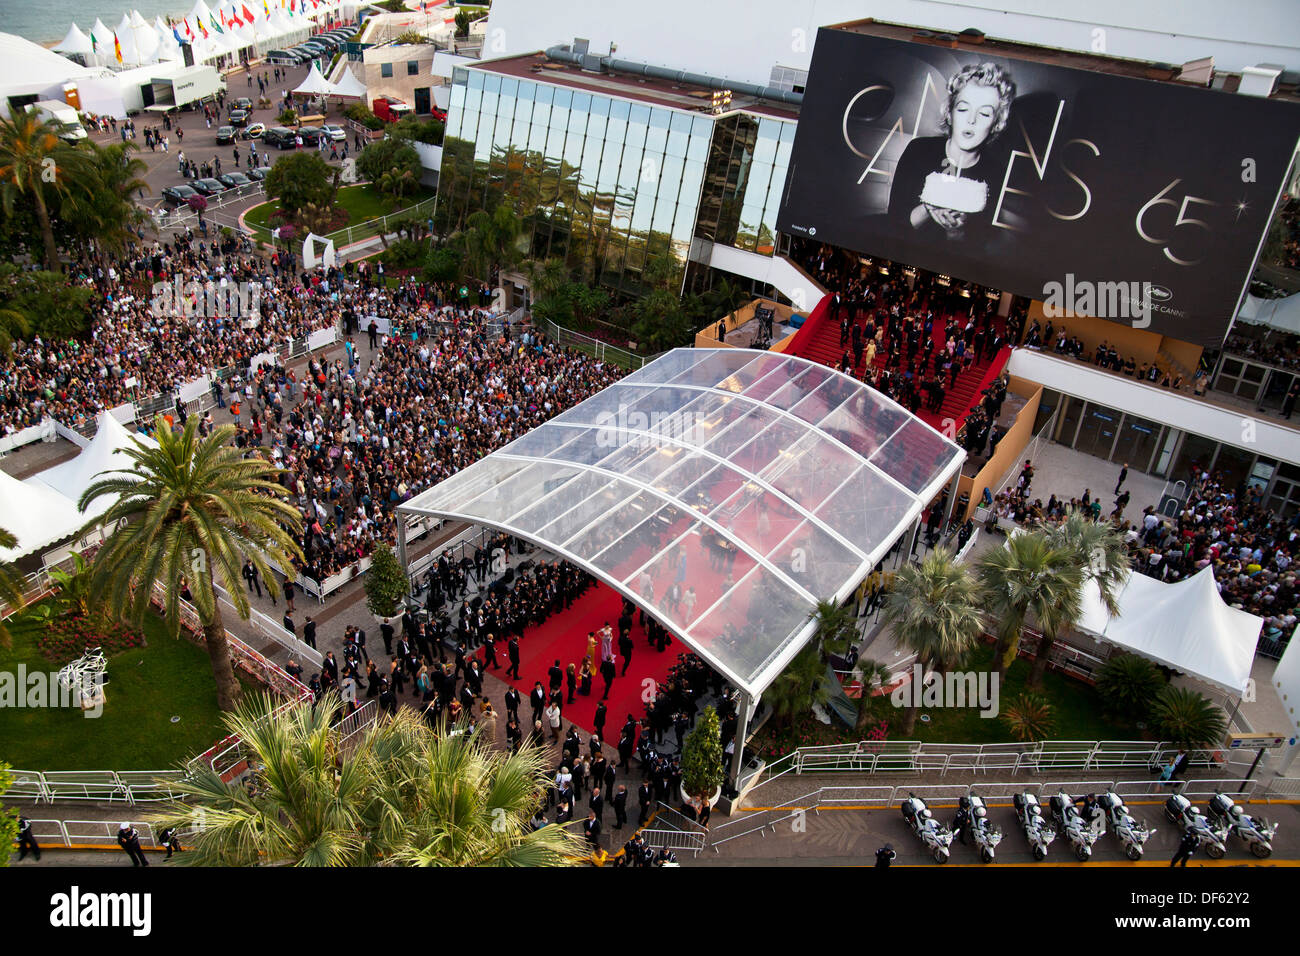 A huge crowd watches celebrities walk down the red carpet at Cannes Film Festival Stock Photo